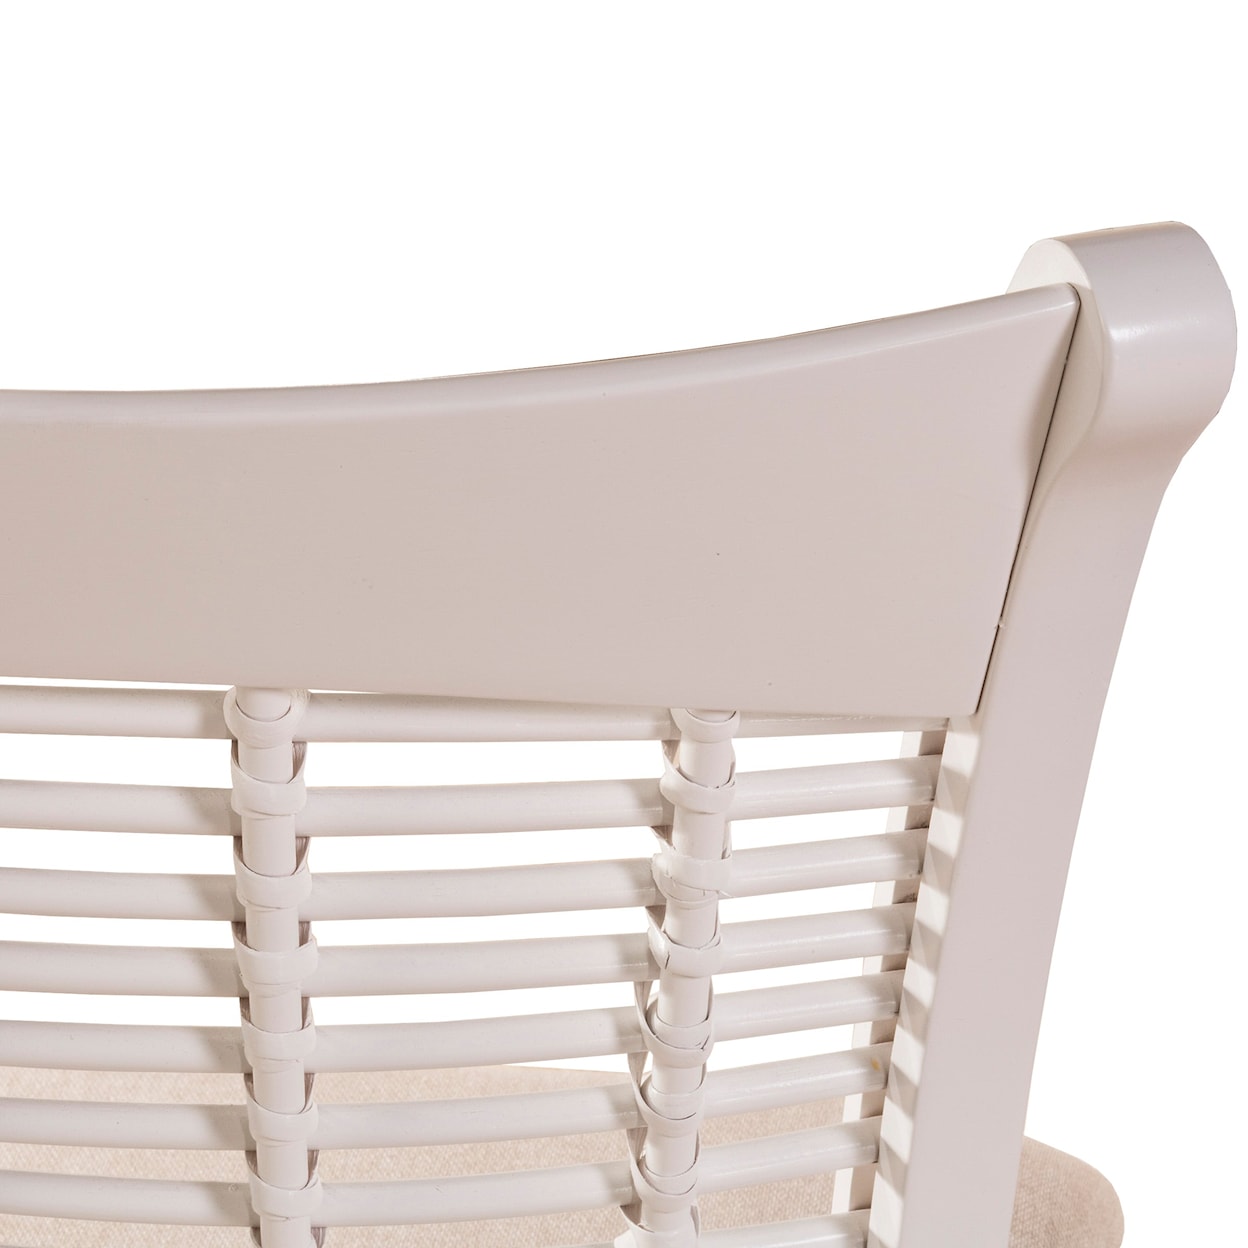 Hillsdale Bayberry Dining Chair